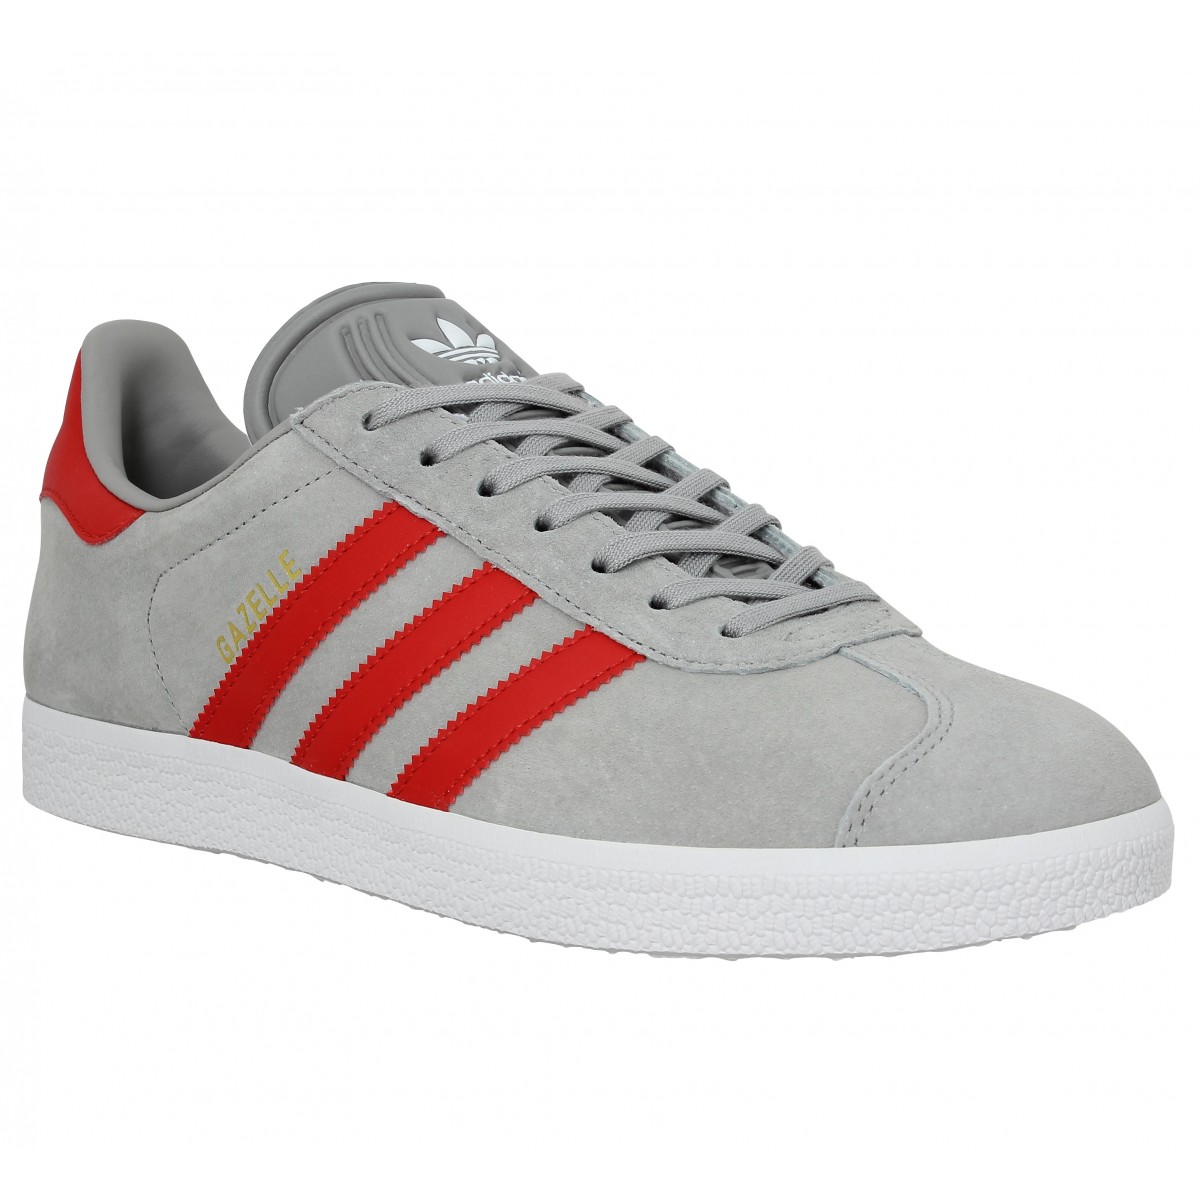 Adidas gazelle homme gris rouge homme | Fanny chaussures